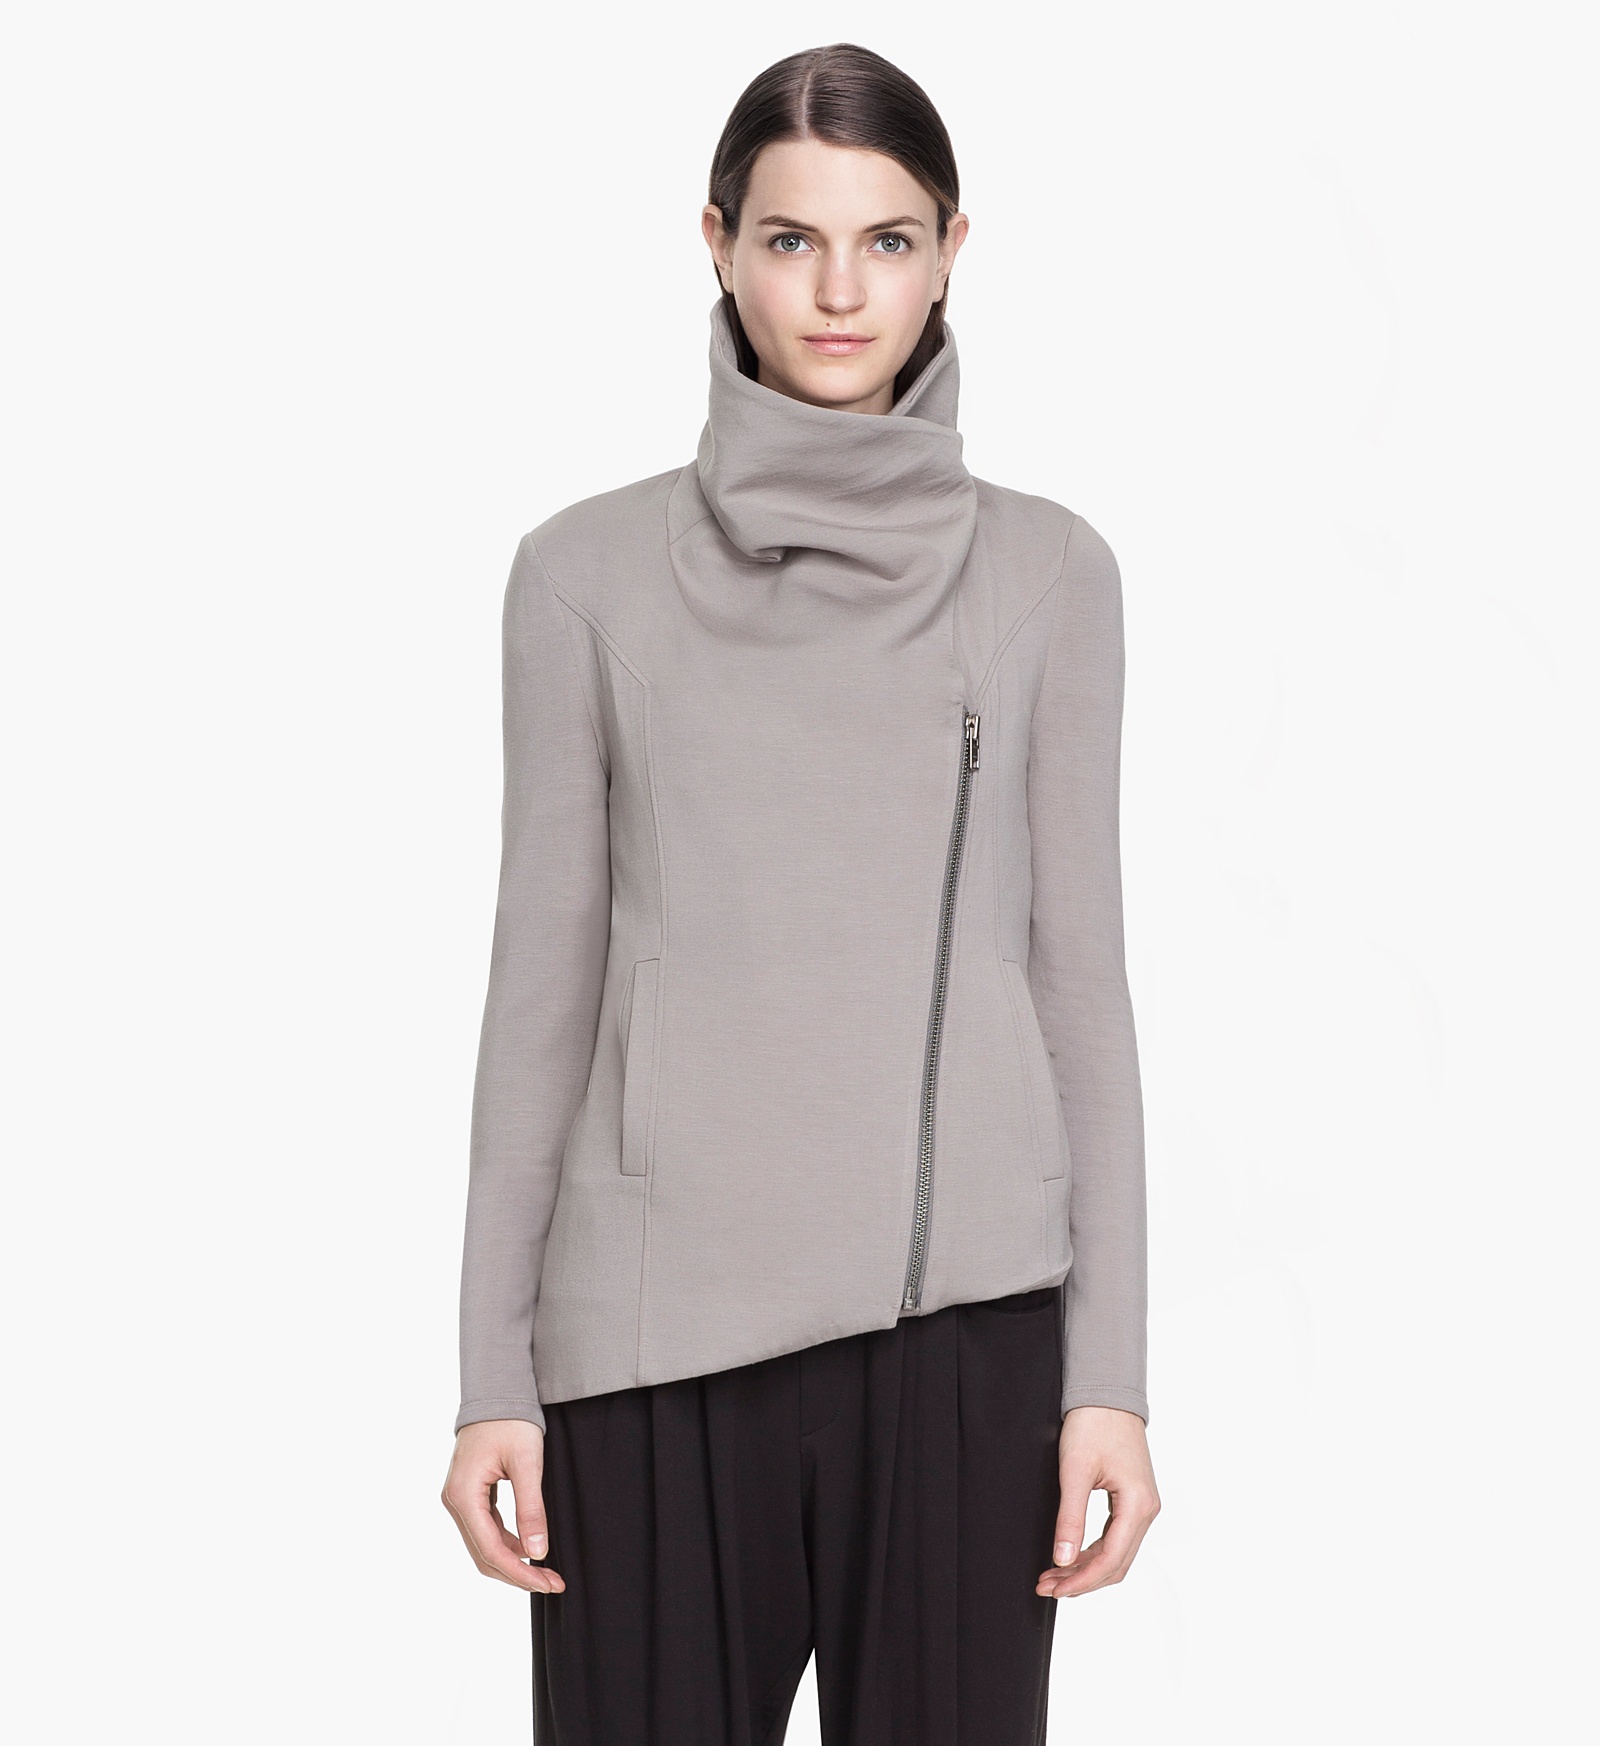 Shop Helmut Lang on A Few Goody Gumdrops and Get 25% Off! - A Few Goody ...